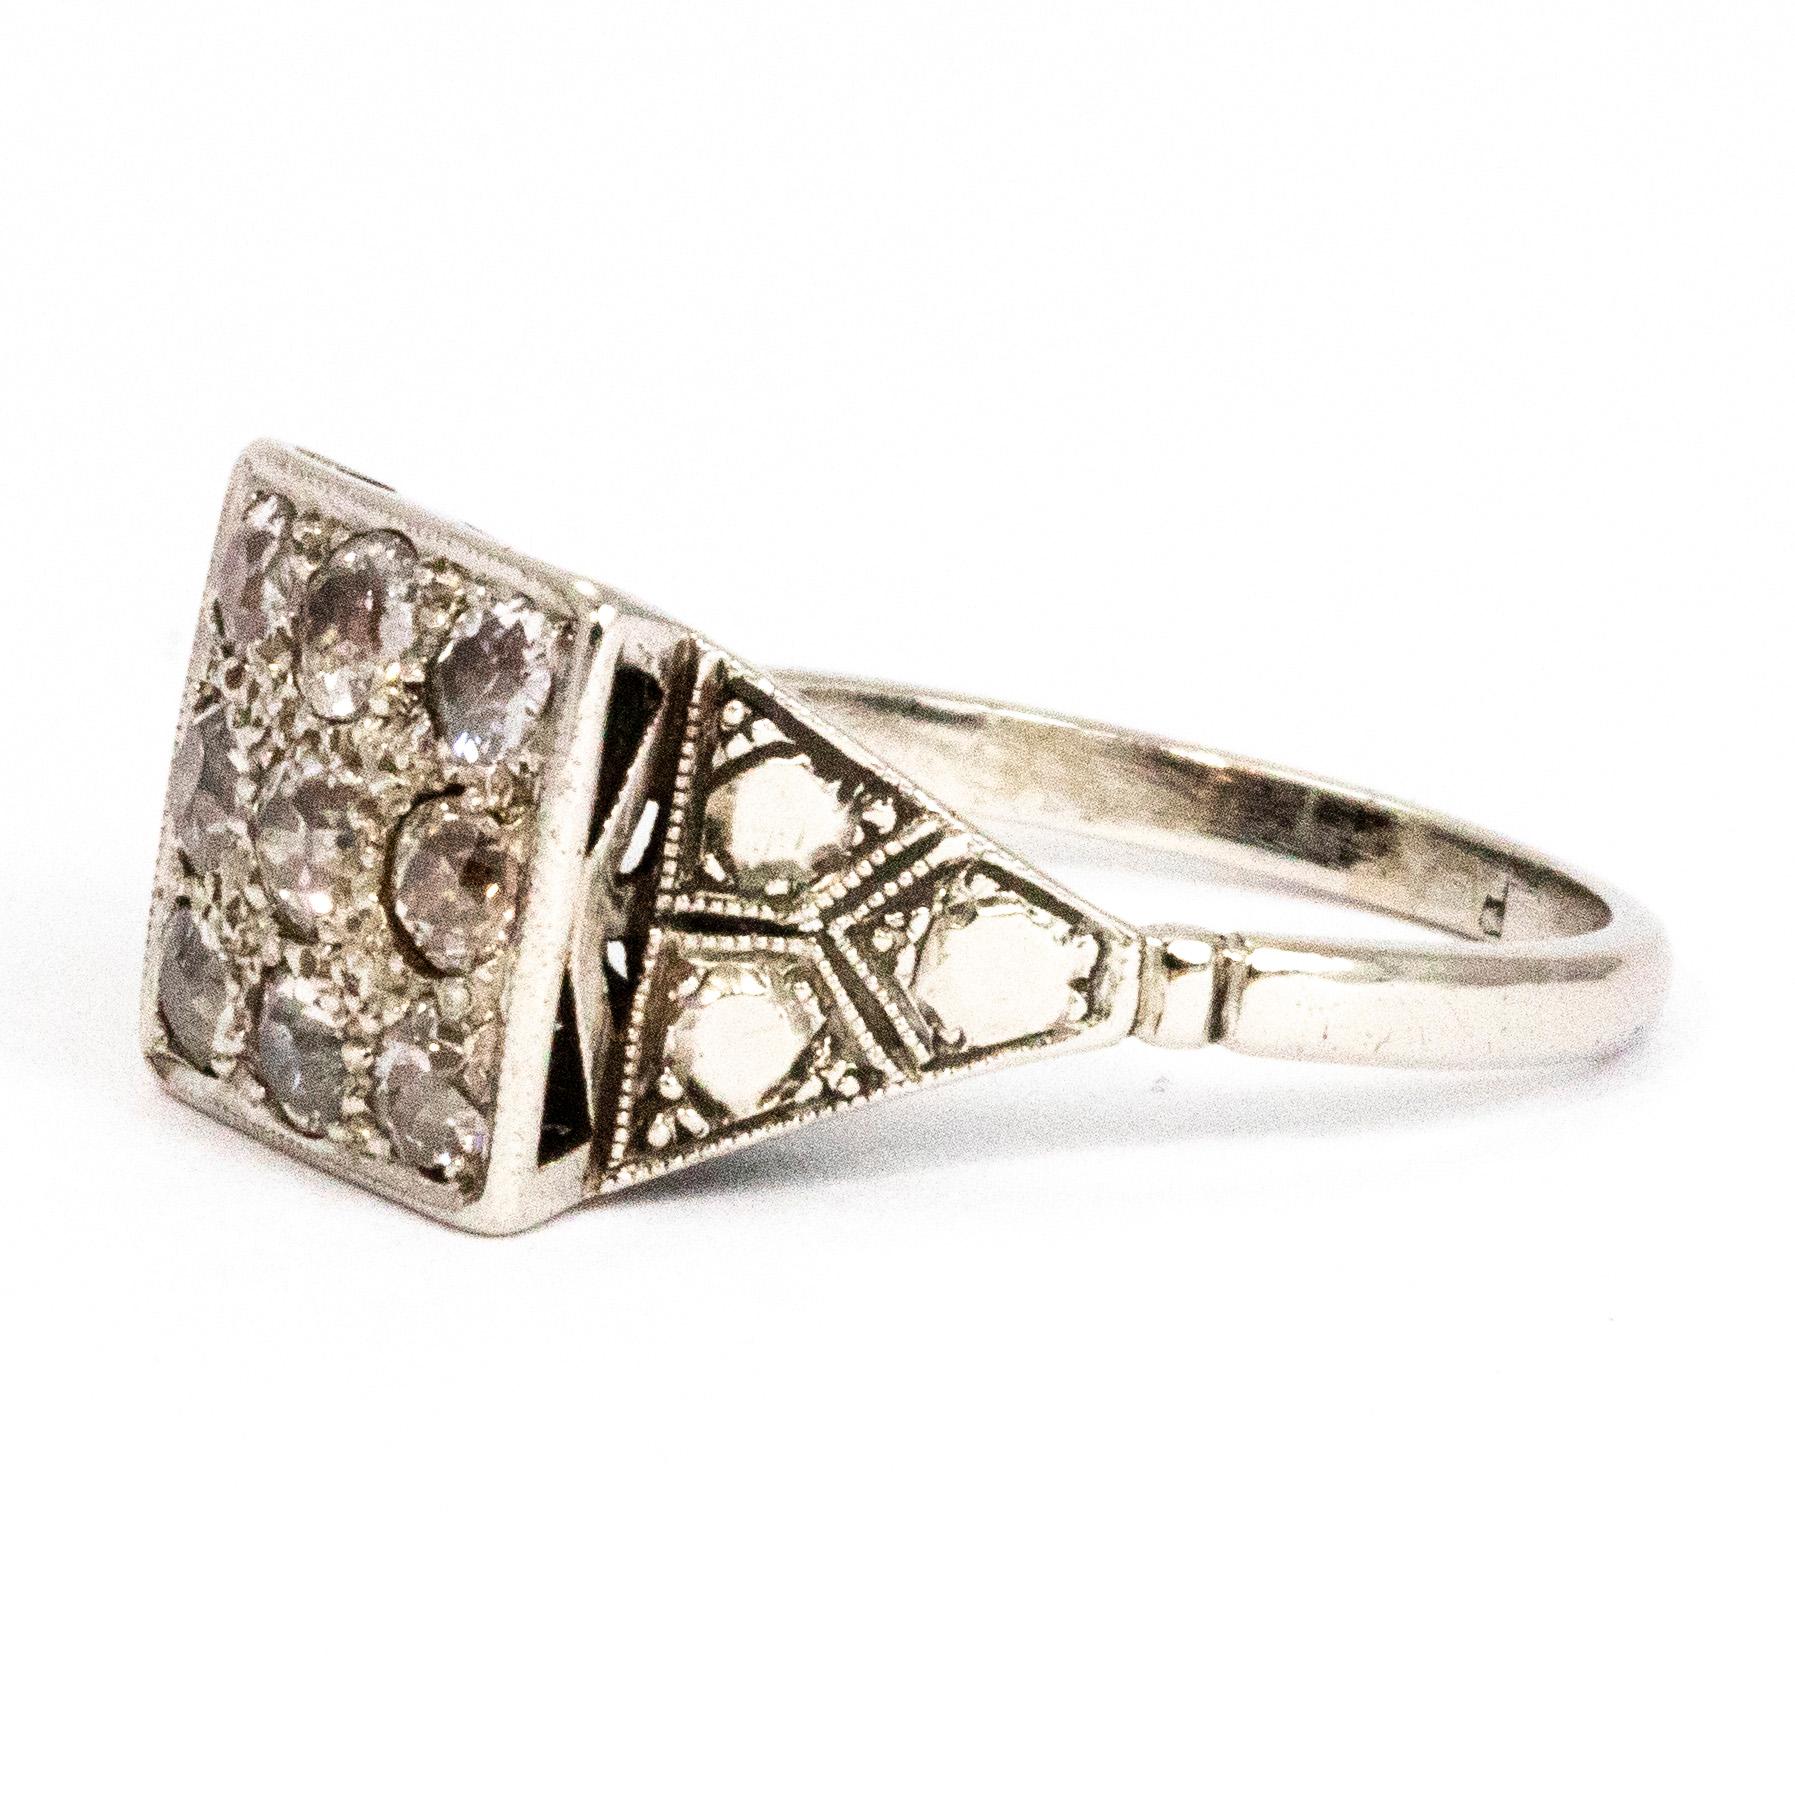 This show stopping piece holds a total of nine diamonds measuring 7pts each. The design of this ring has a very Art Deco feel to it which is even shown in the gorgeously detailed setting. The ring stands quite high on the finger so you are able to